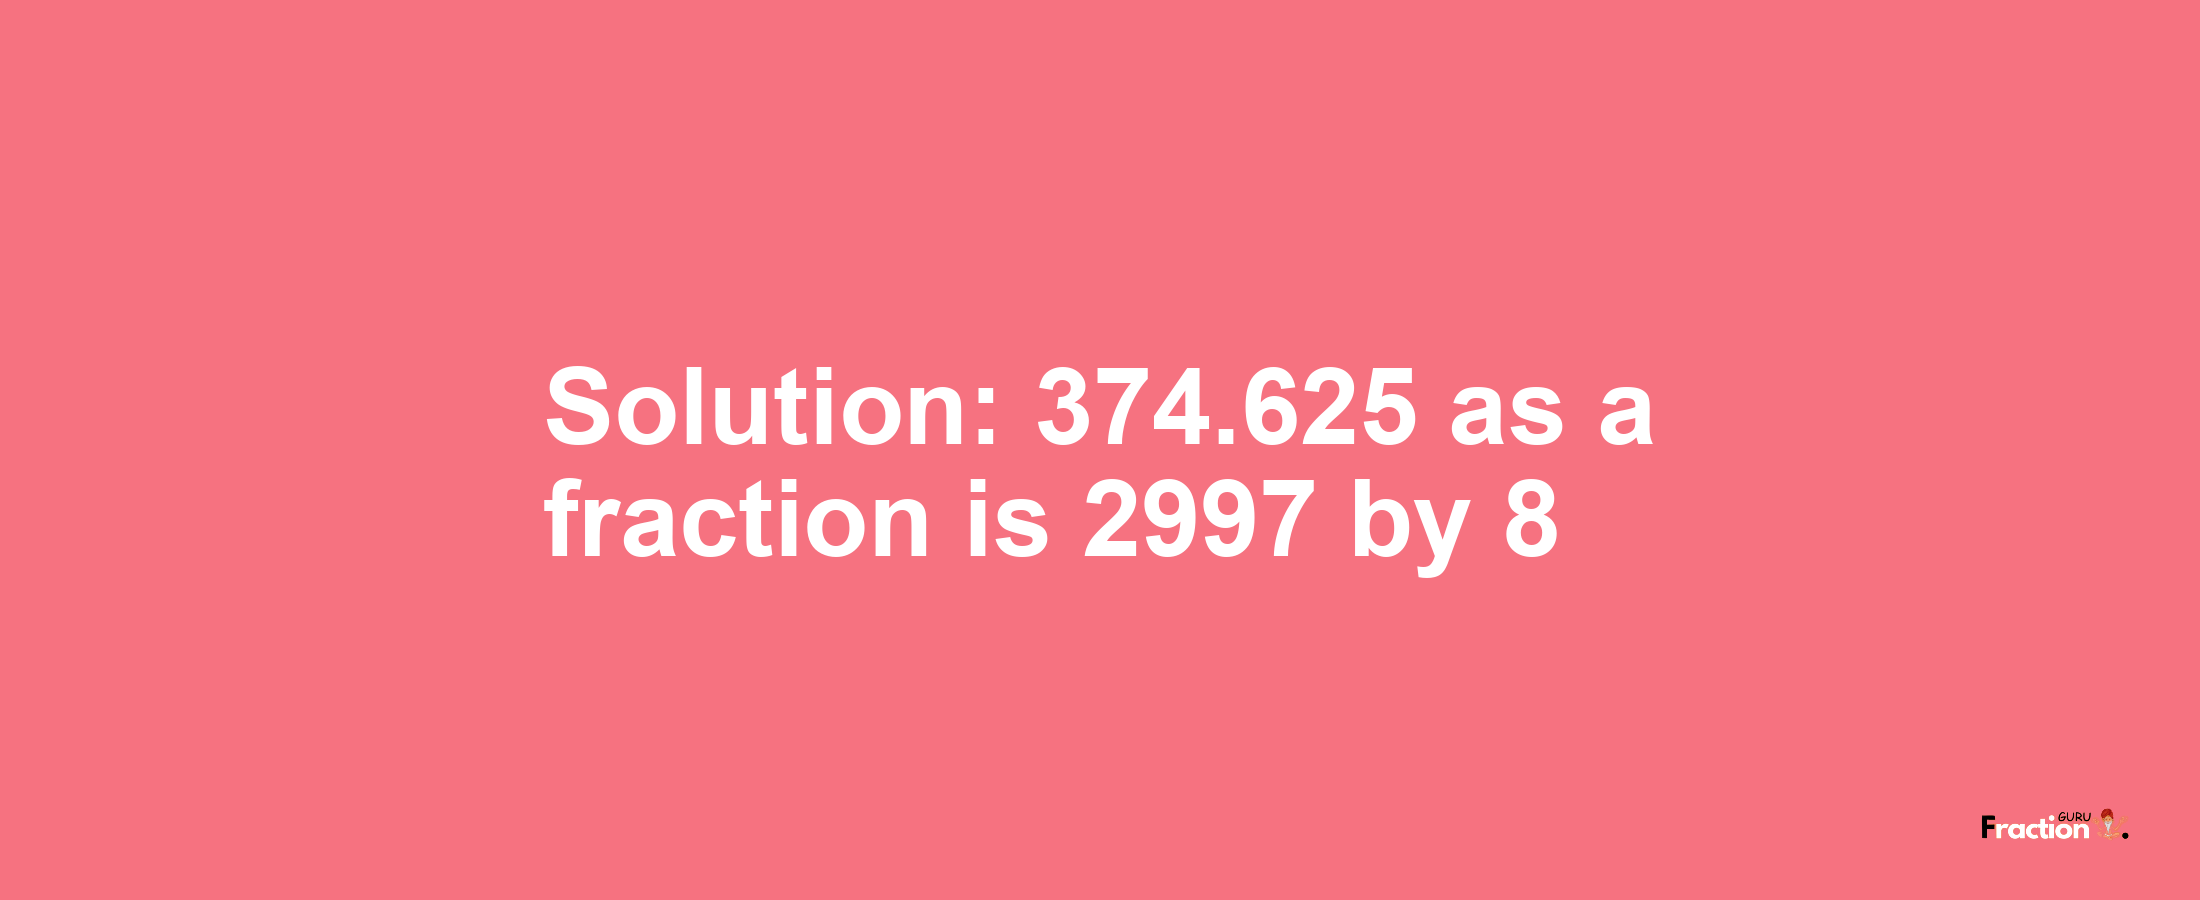 Solution:374.625 as a fraction is 2997/8